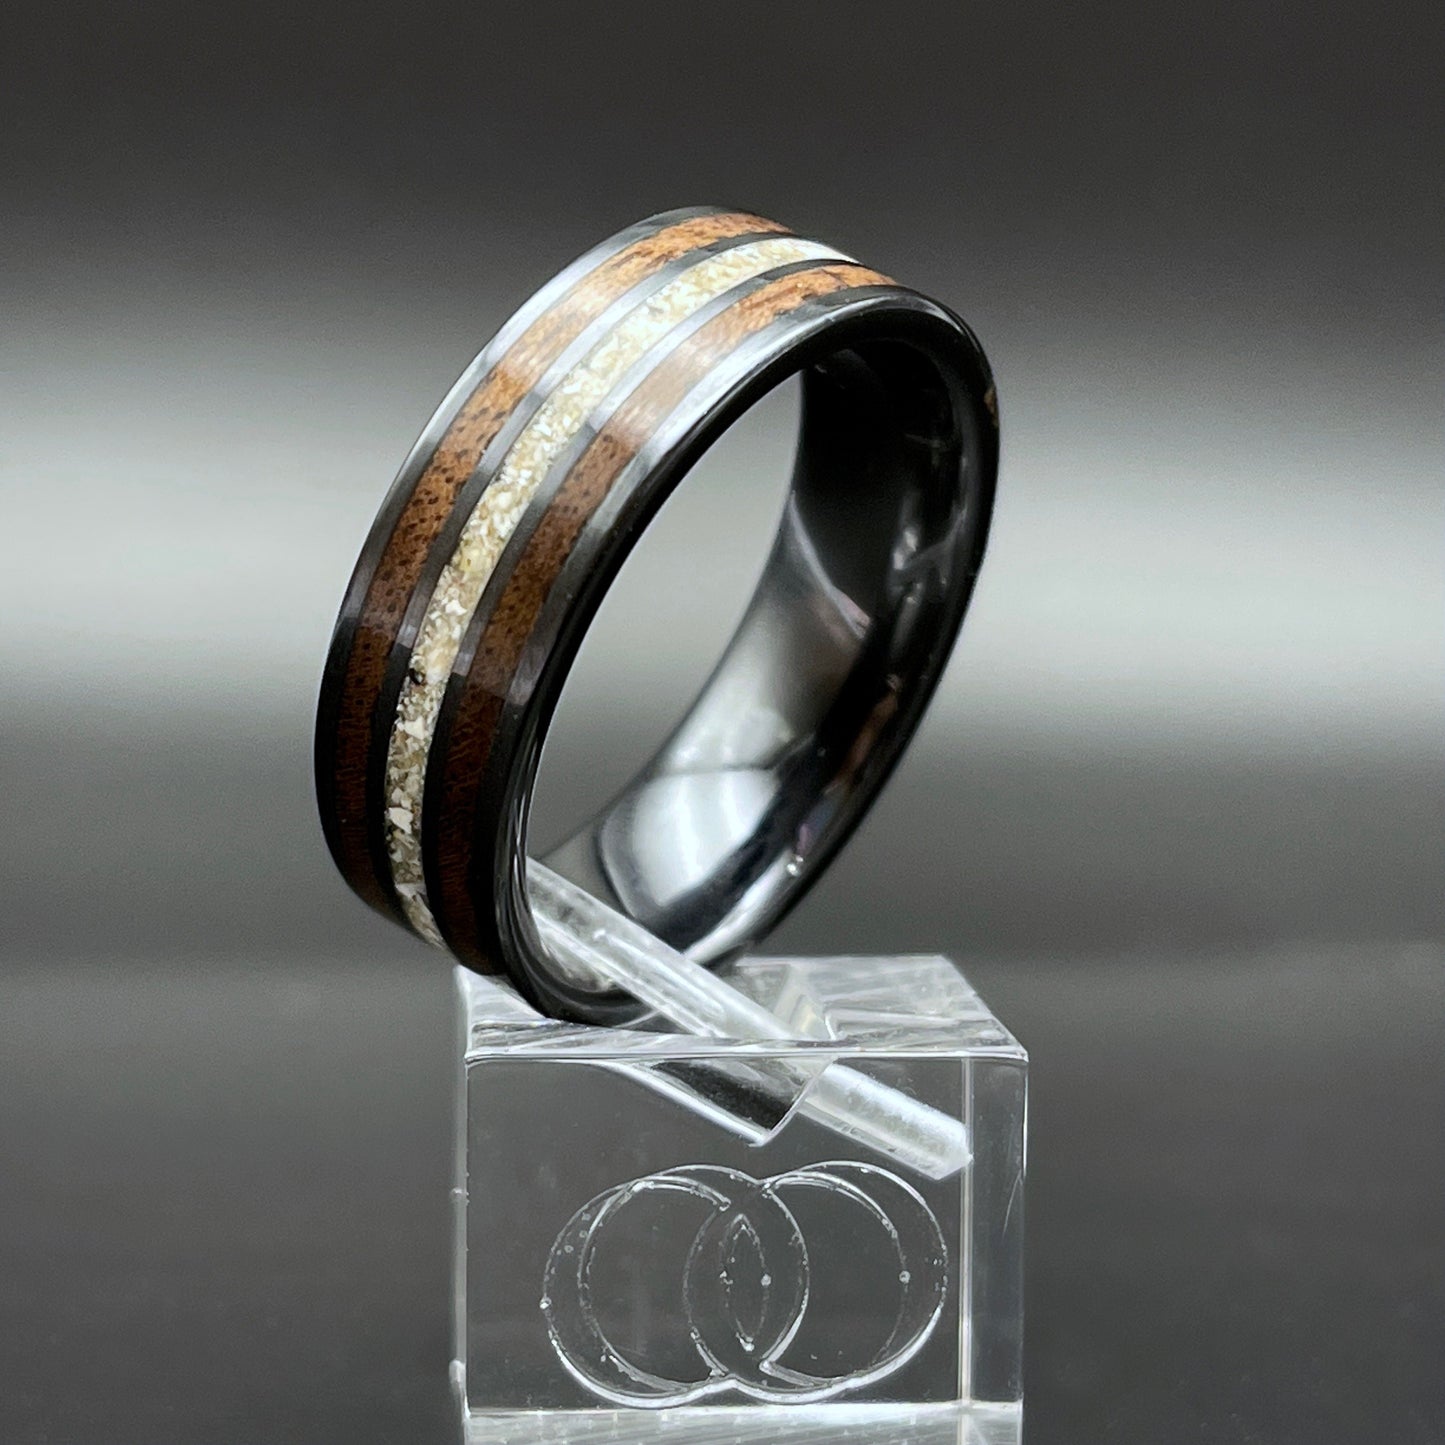 8mm Cremation Ring with Walnut Accents